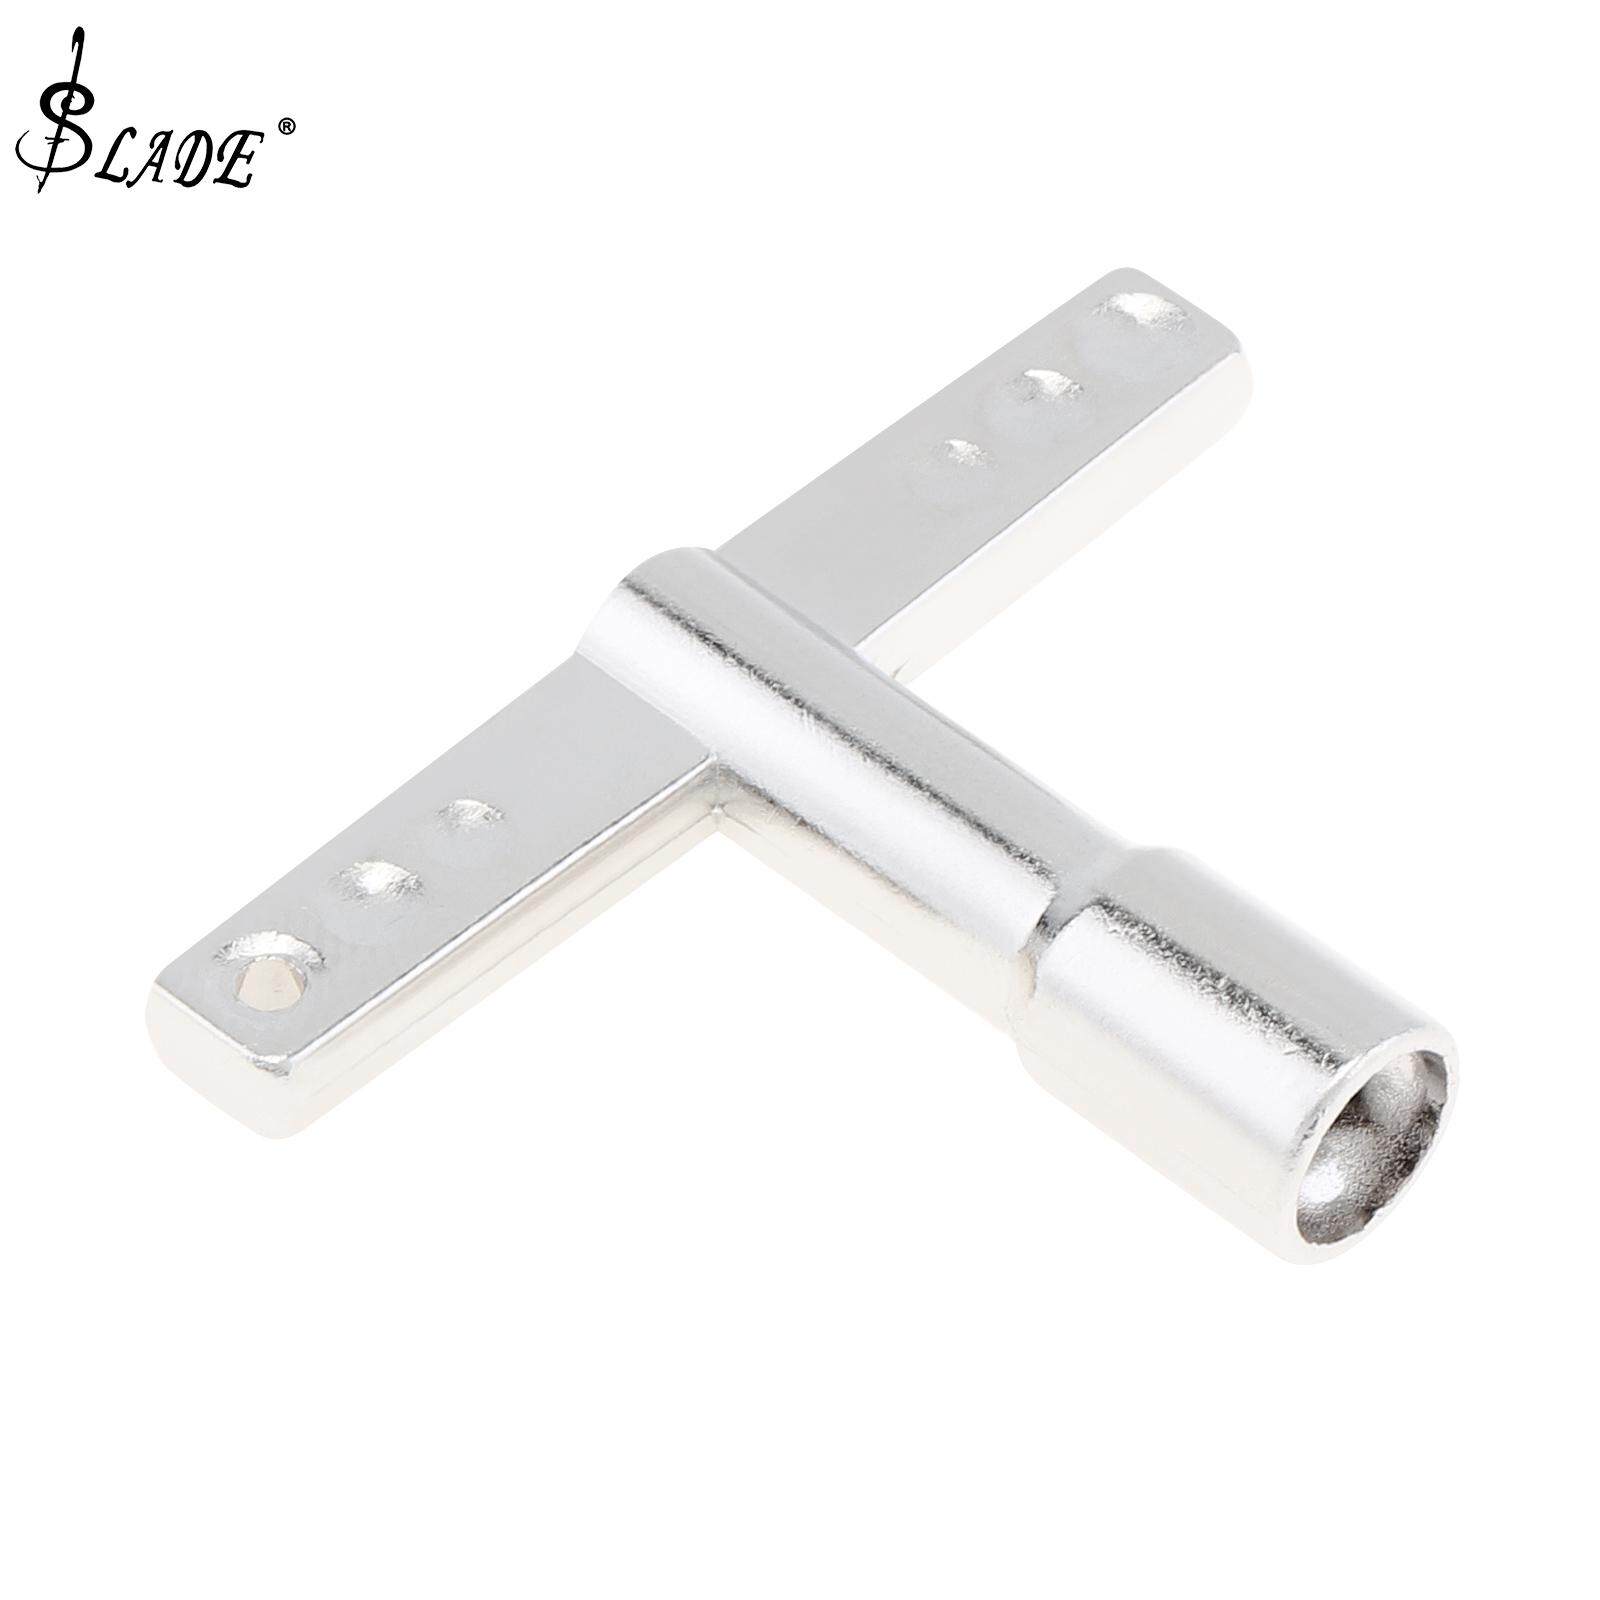 SLADE T Shaped Quick Remove Jazz Snare Drum Tuning Wrench Key with